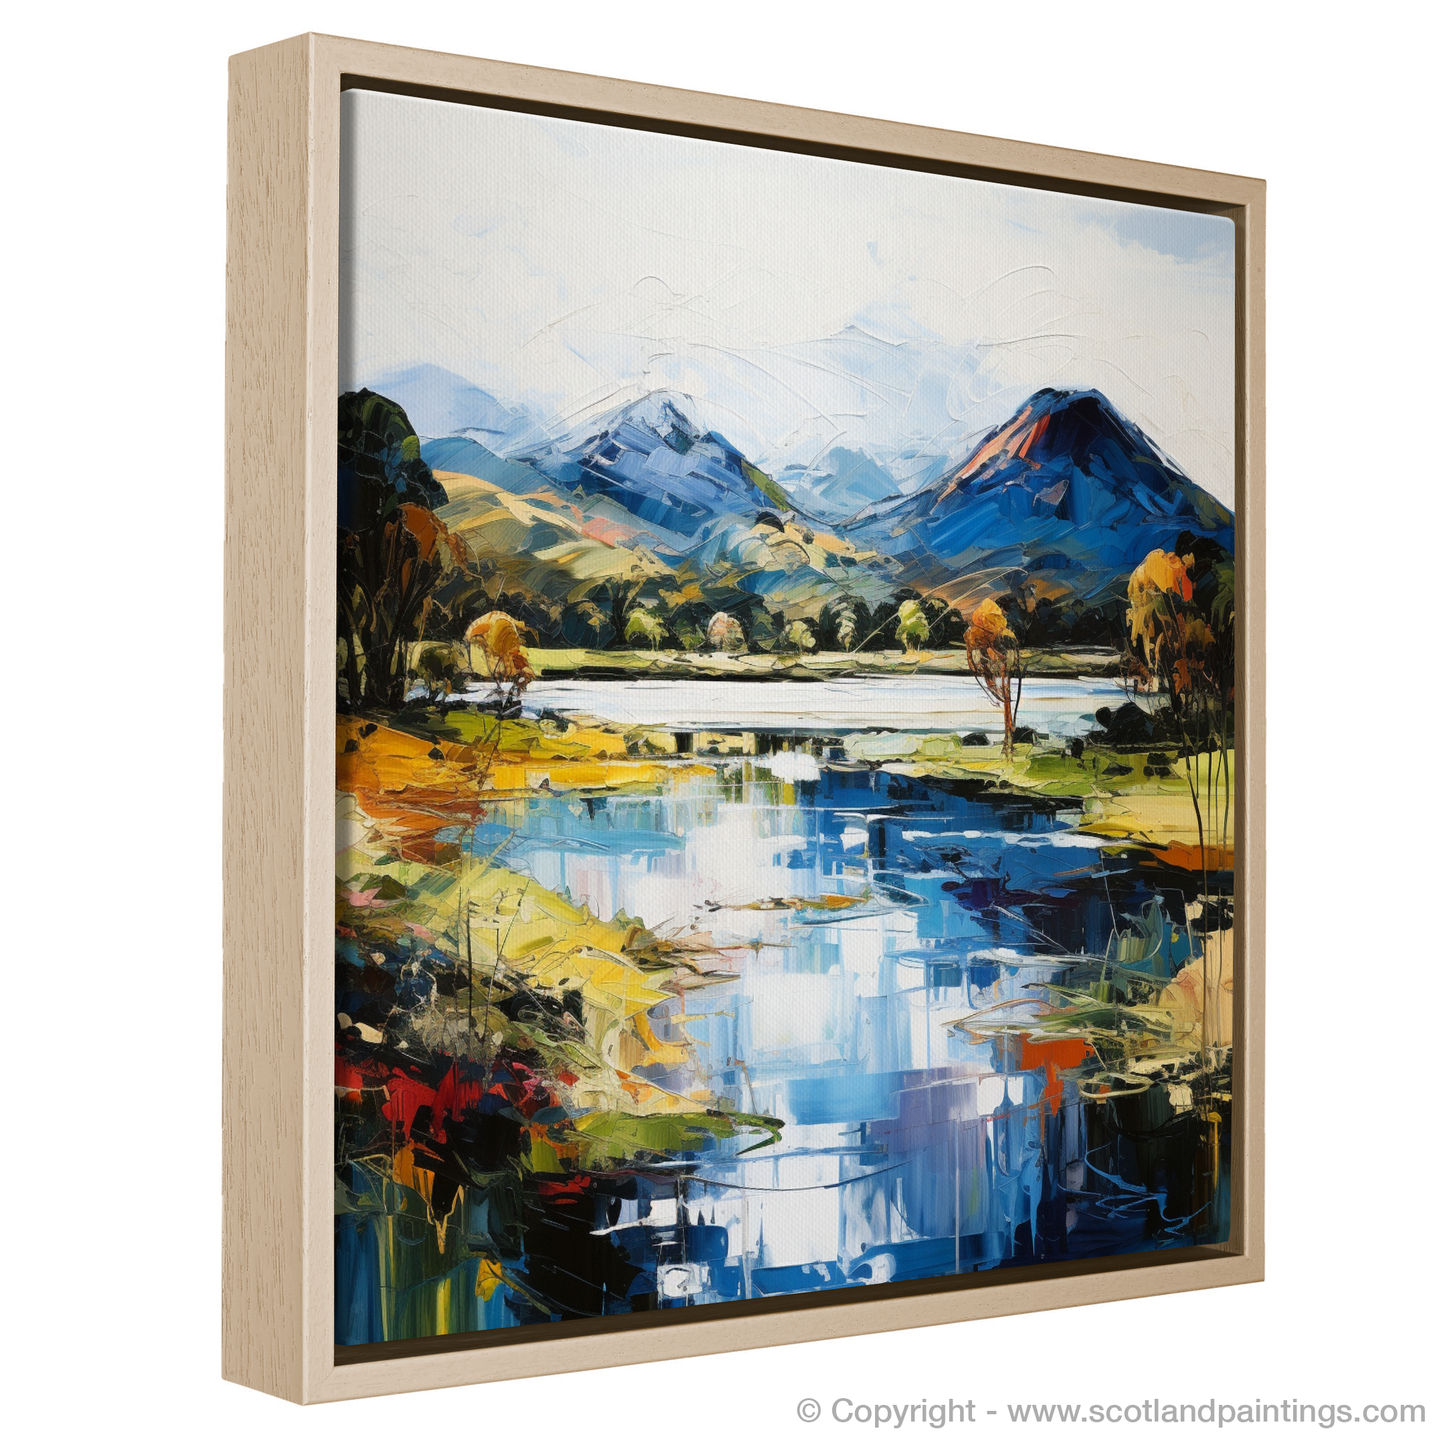 Painting and Art Print of Loch Ard, Stirling entitled "Expressionist Enchantment of Loch Ard".